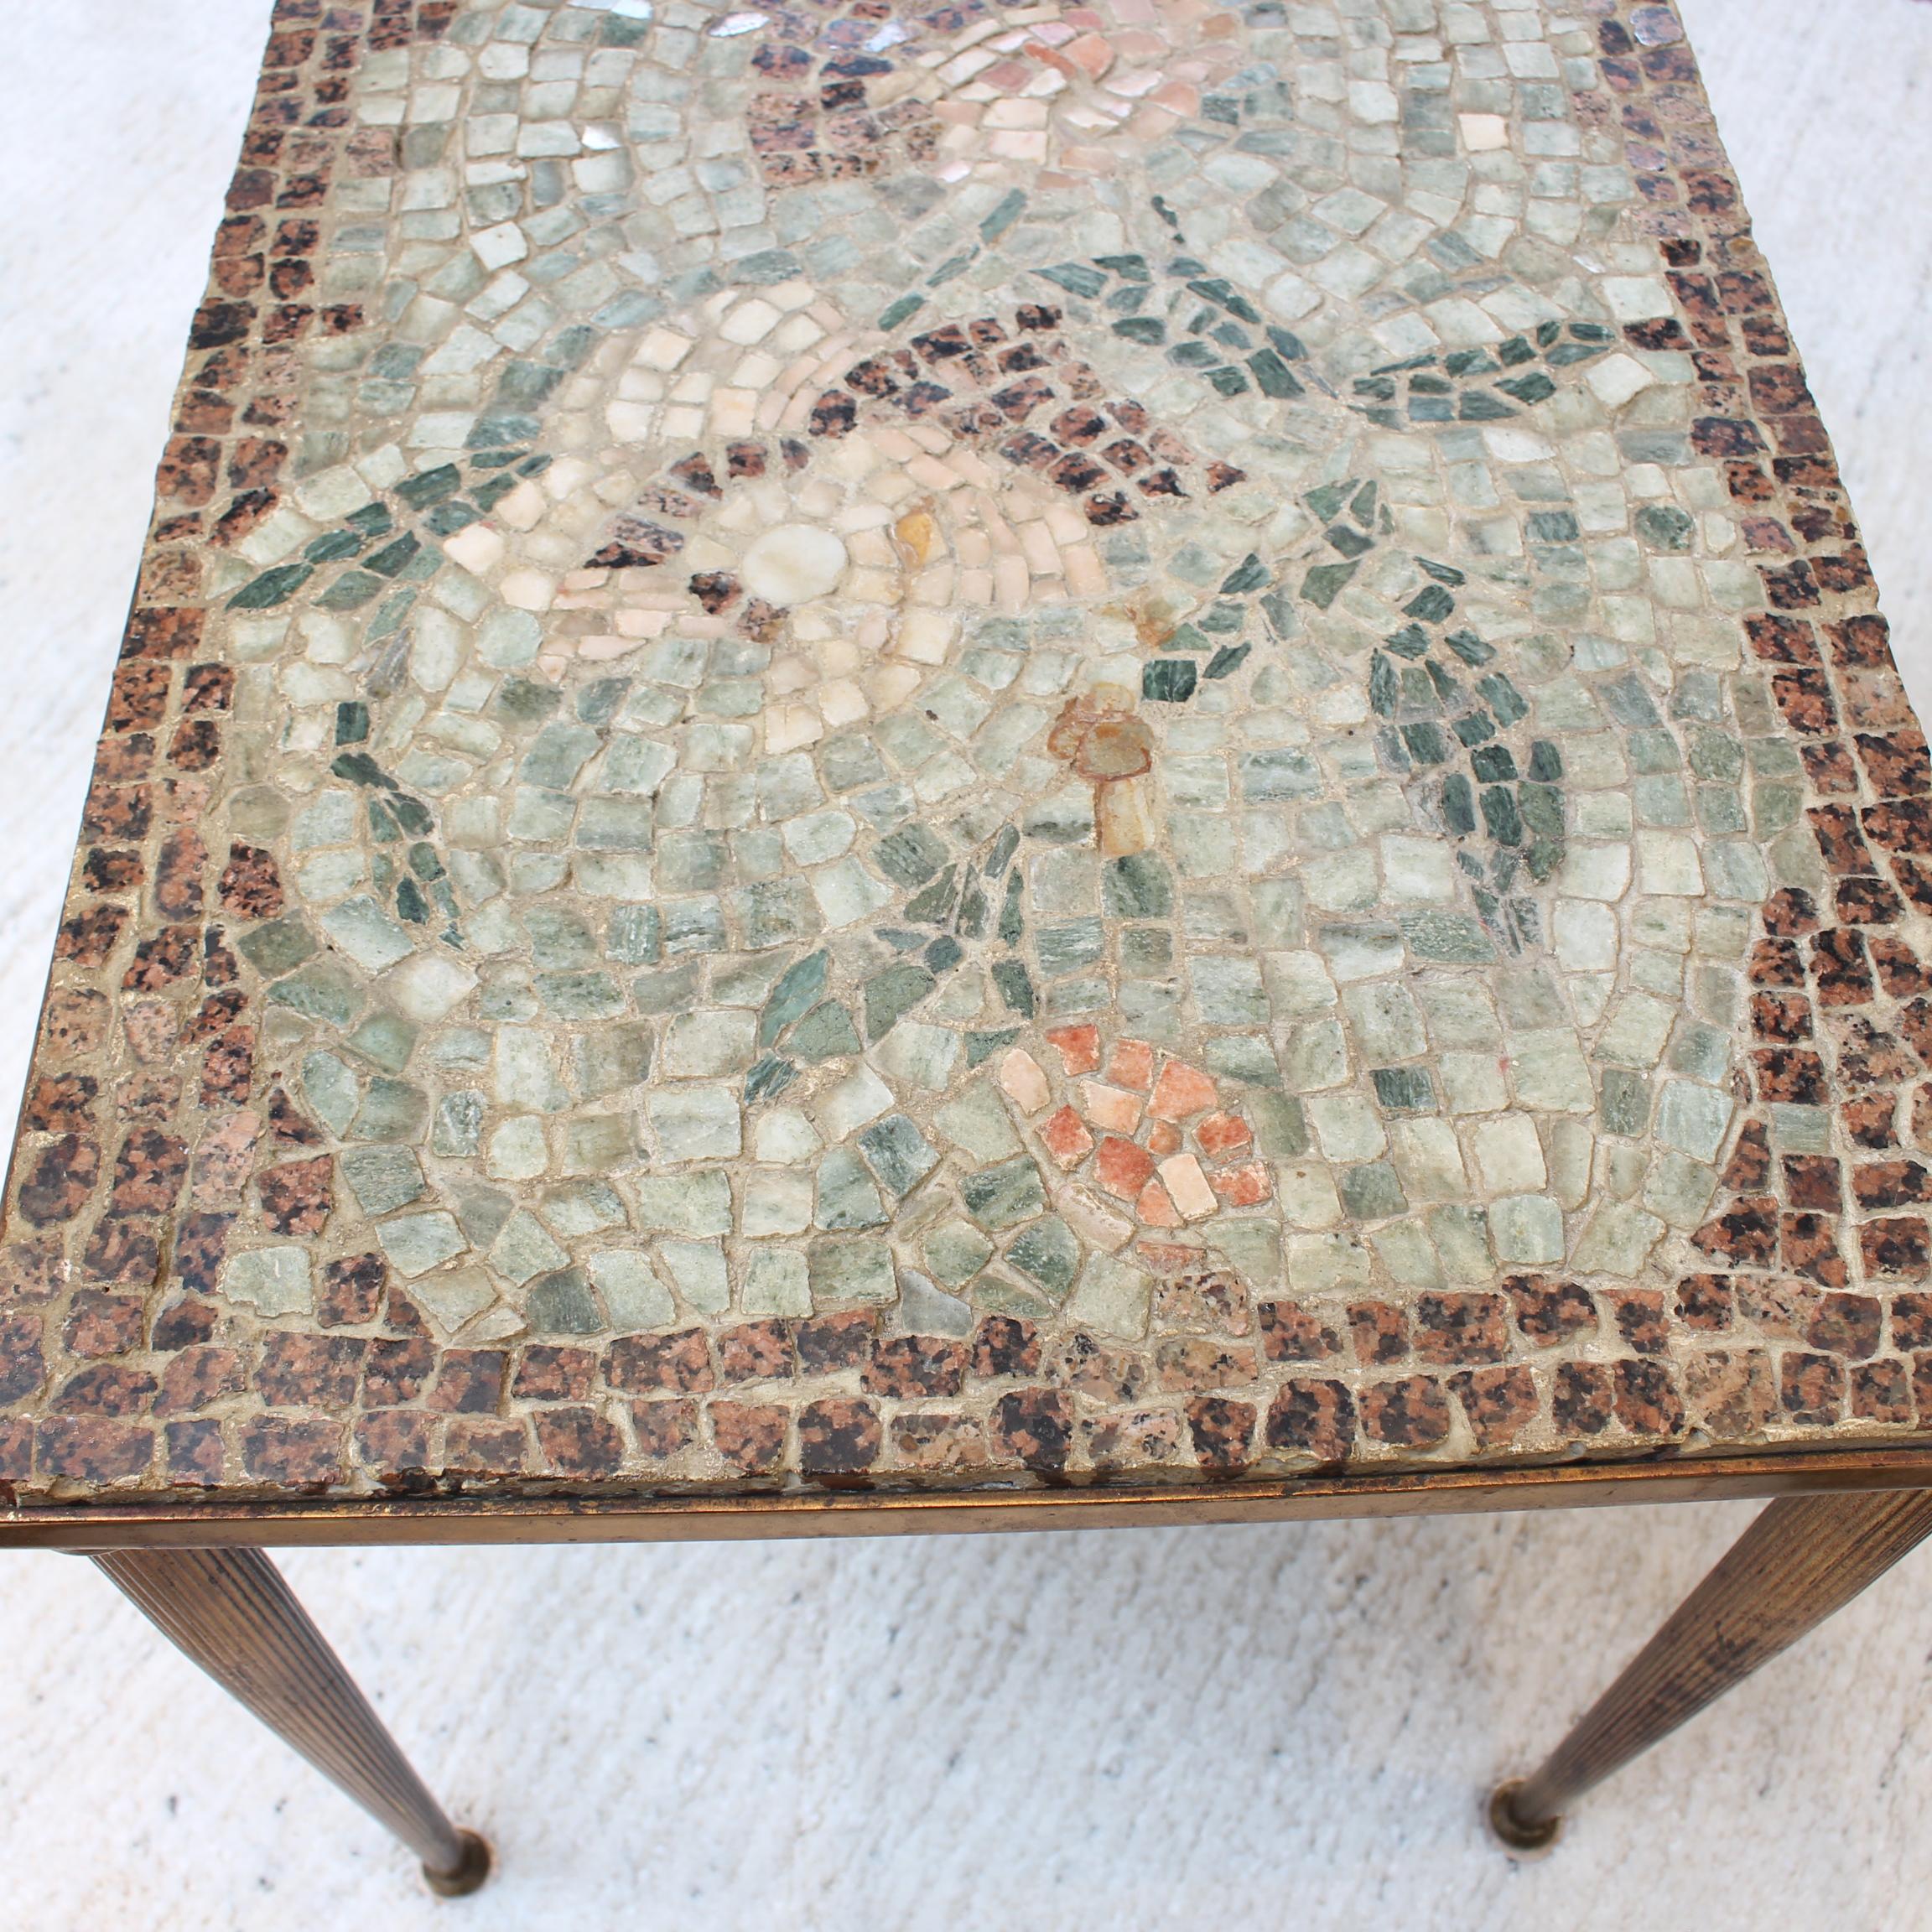 Vintage Low Table with Italian Style Mosaic Top, 'circa 1950s' For Sale 11